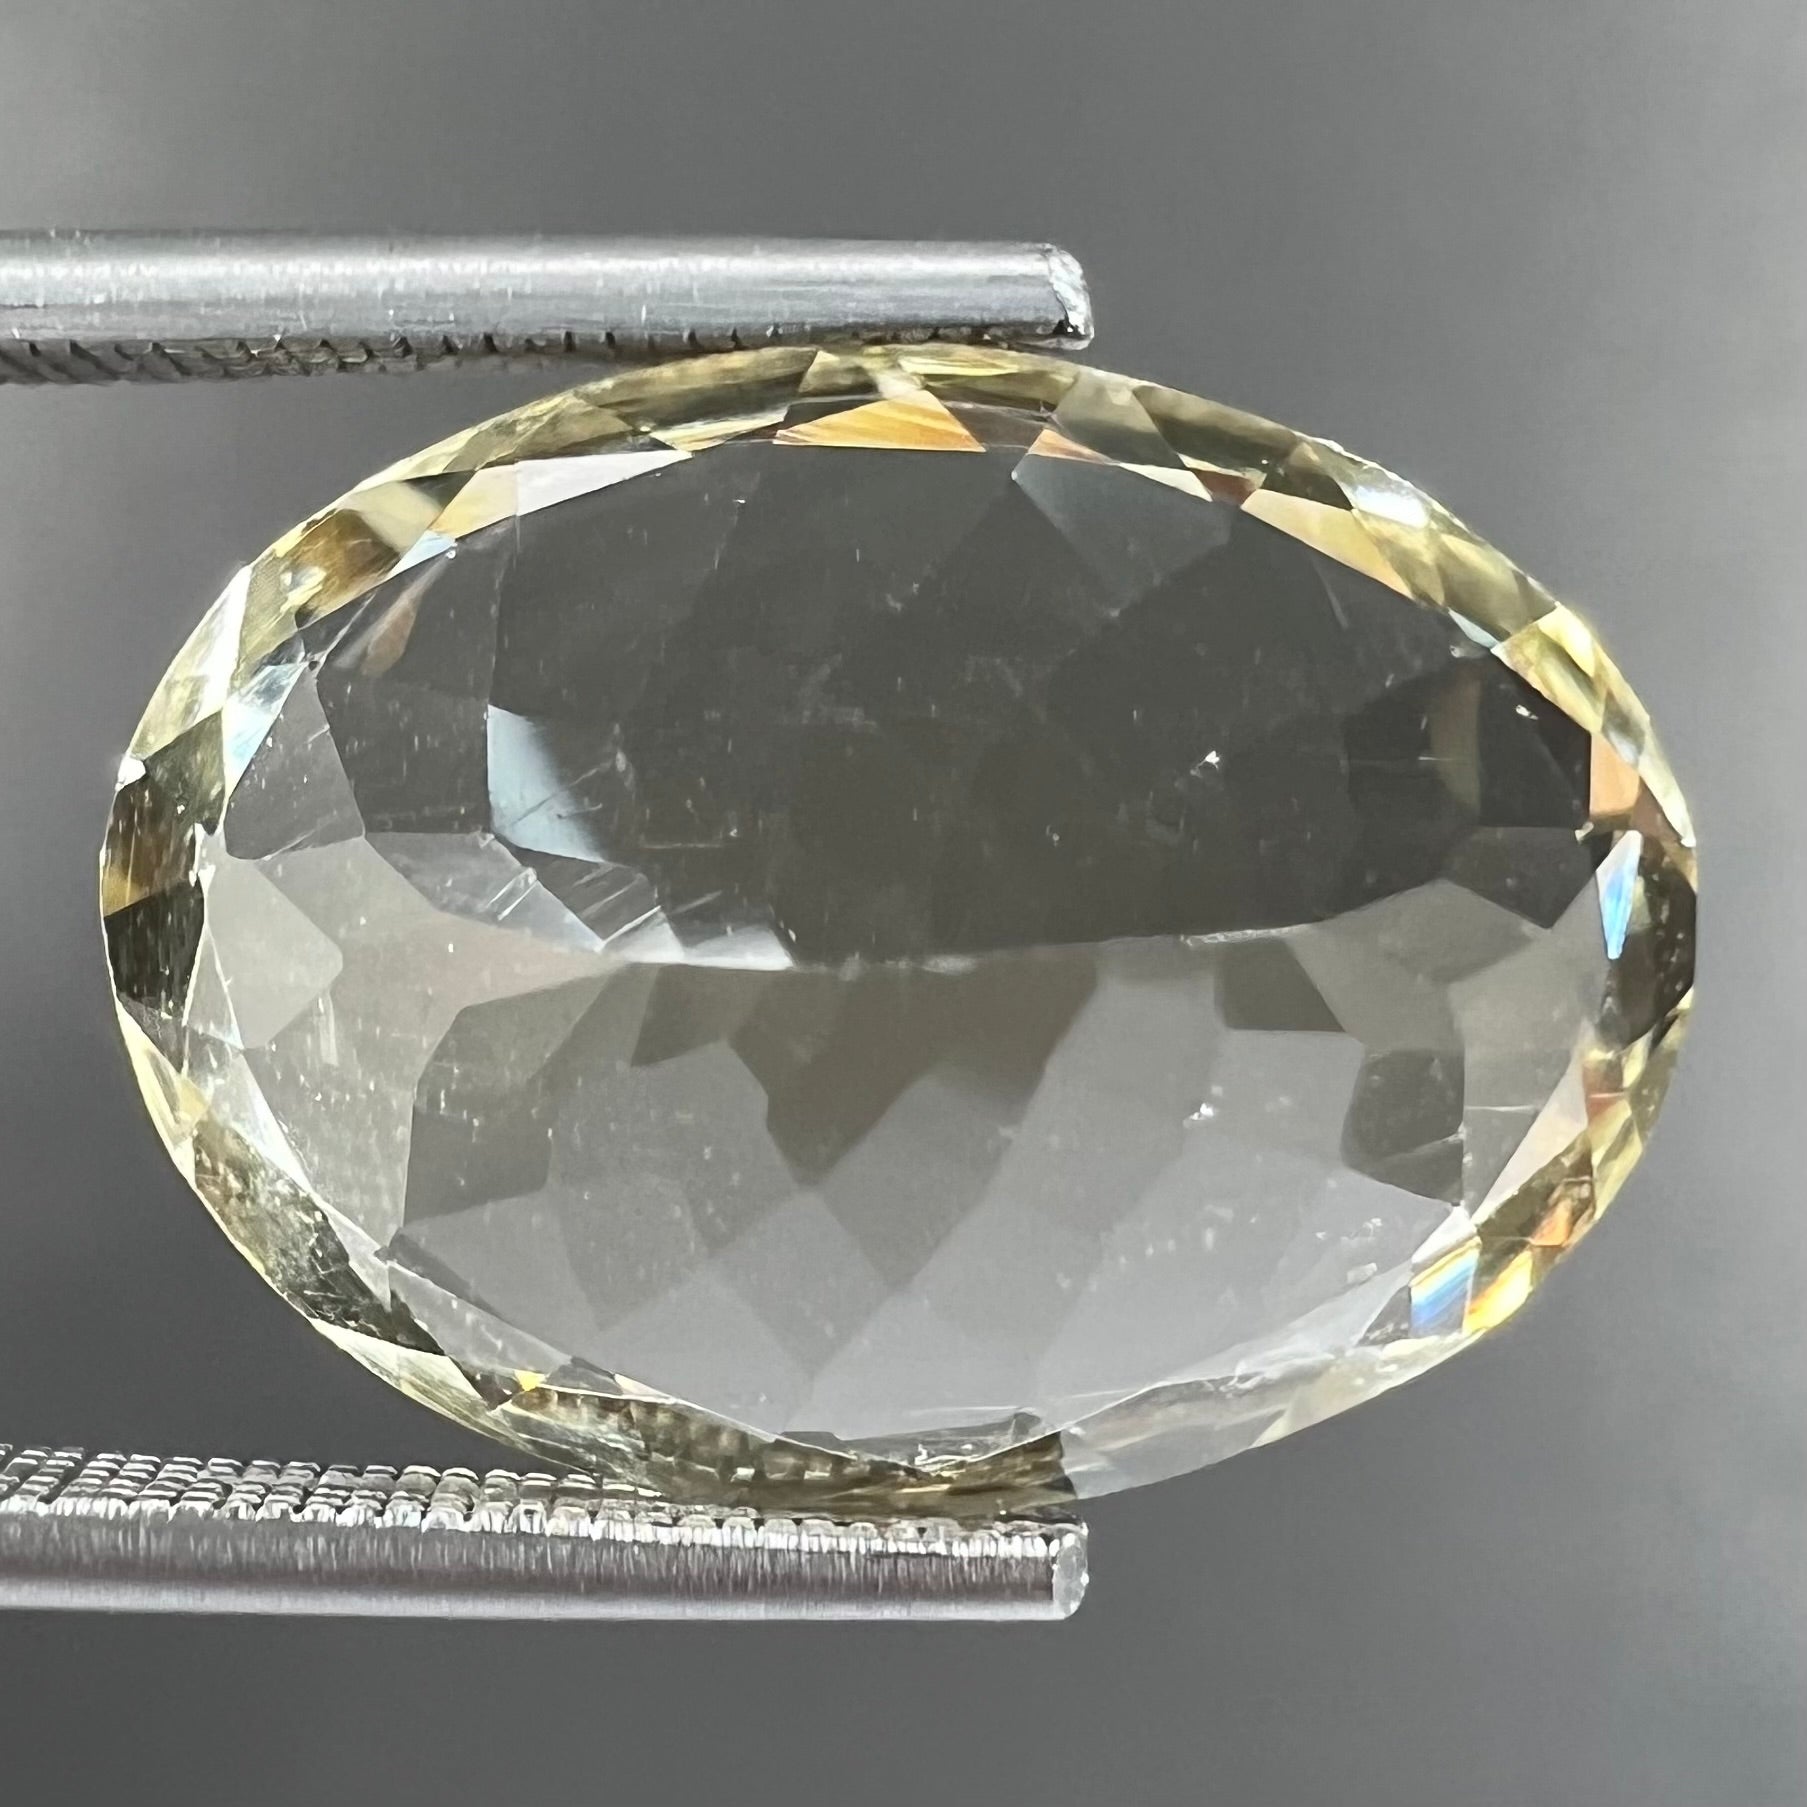 A loose, faceted oval cut citrine stone.  The stone is light yellow in color.